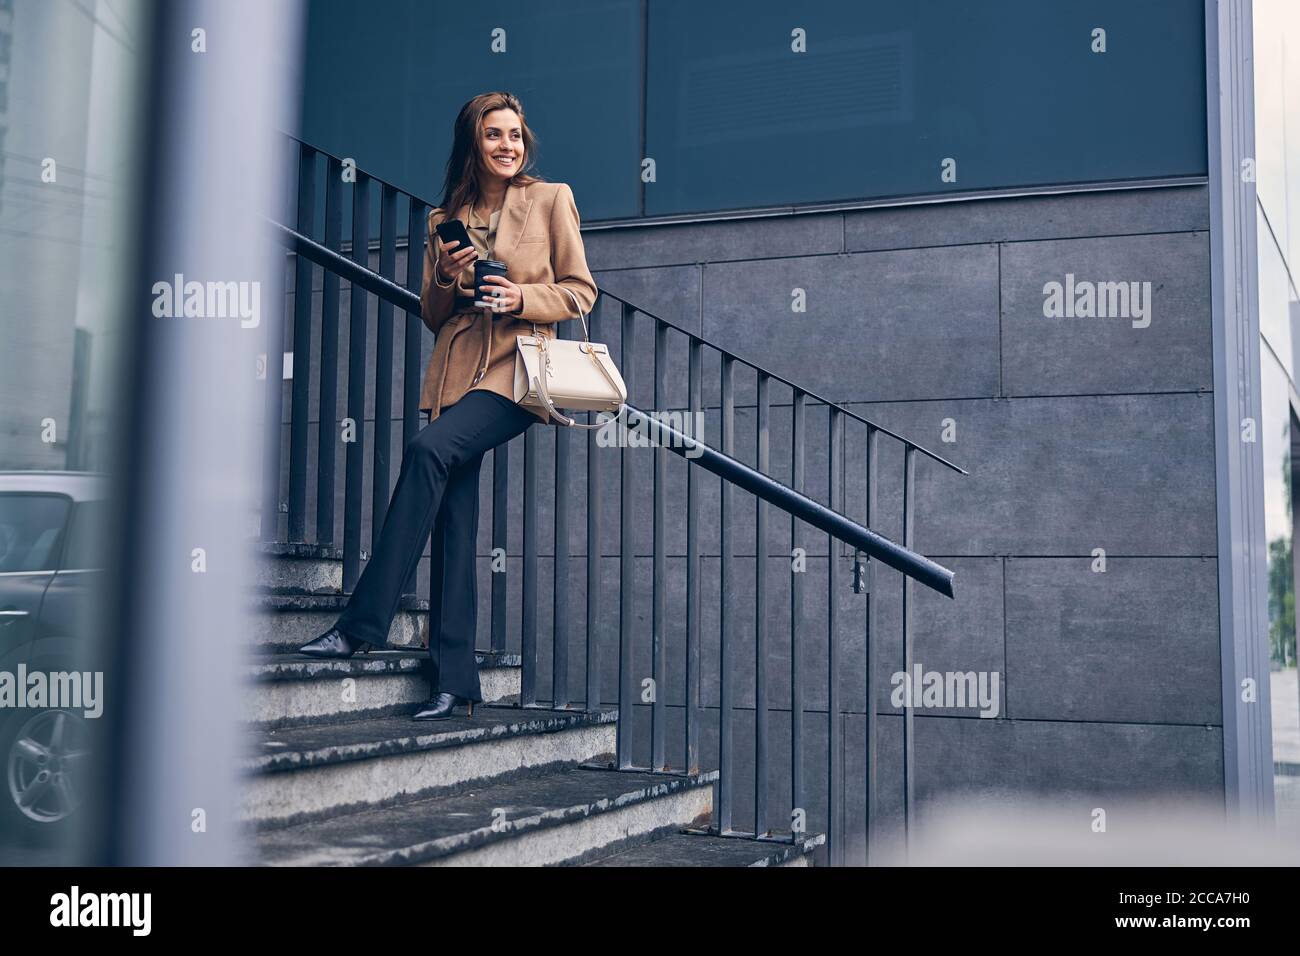 Smiling woman leaning back against the handrail Stock Photo